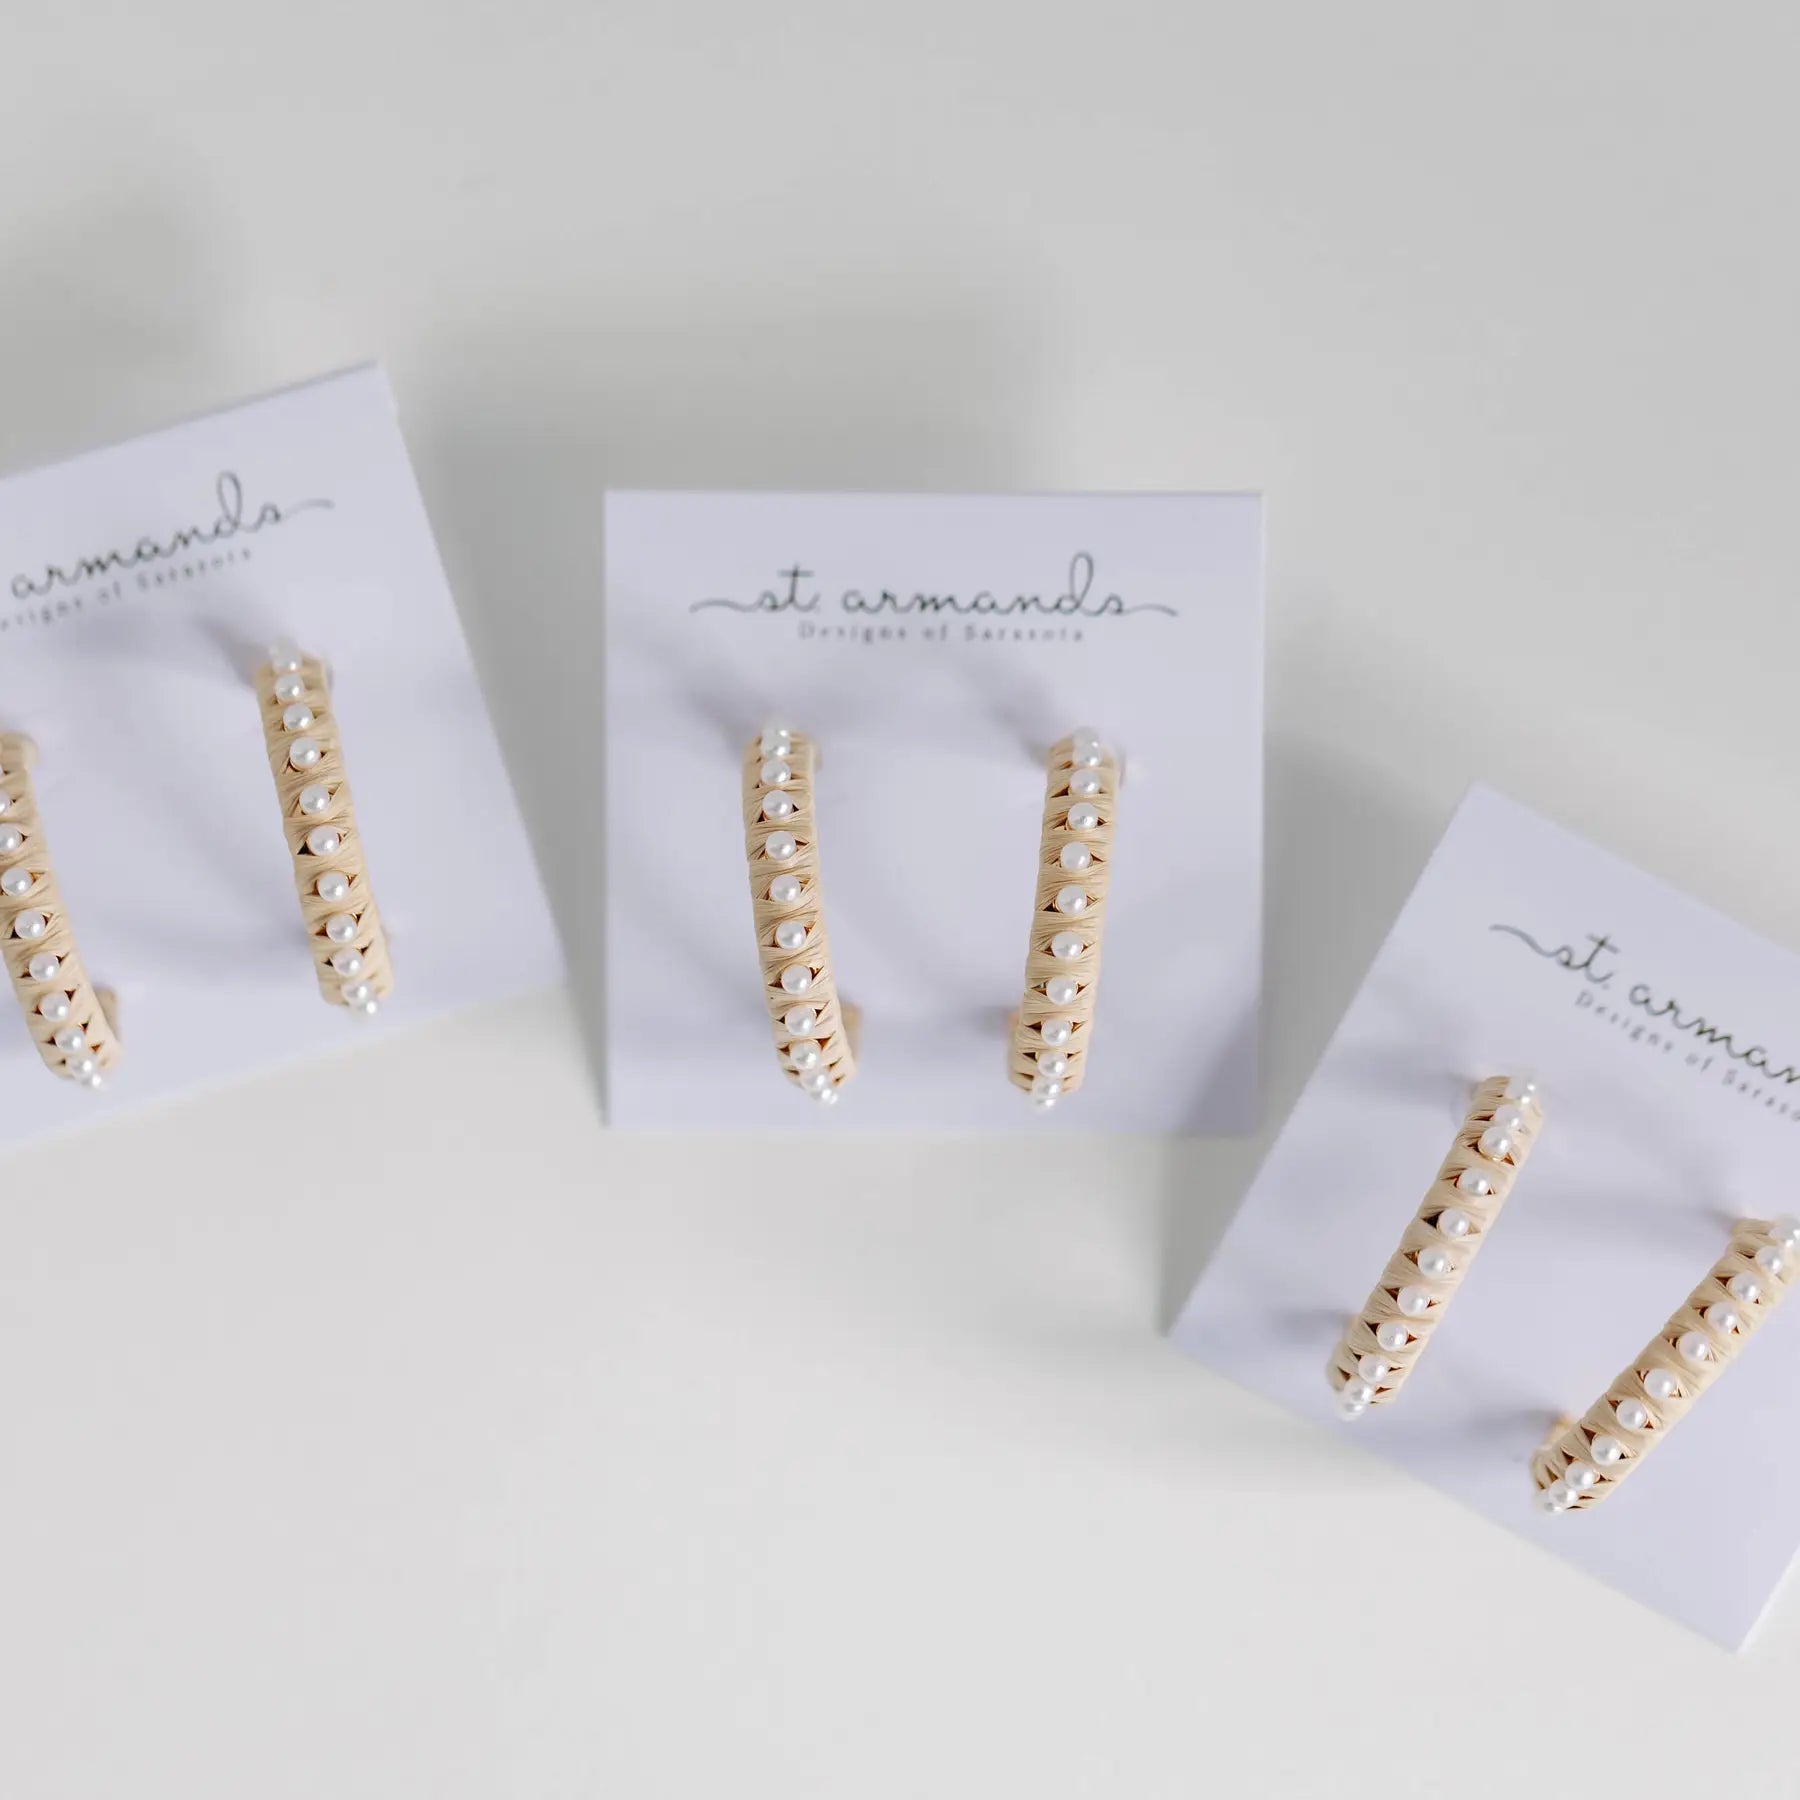 Natural Studded Pearl Raffia Statement Hoop Earrings-110 Jewelry & Hair-St Armands Designs of Sarasota-July & June Women's Fashion Boutique Located in San Antonio, Texas